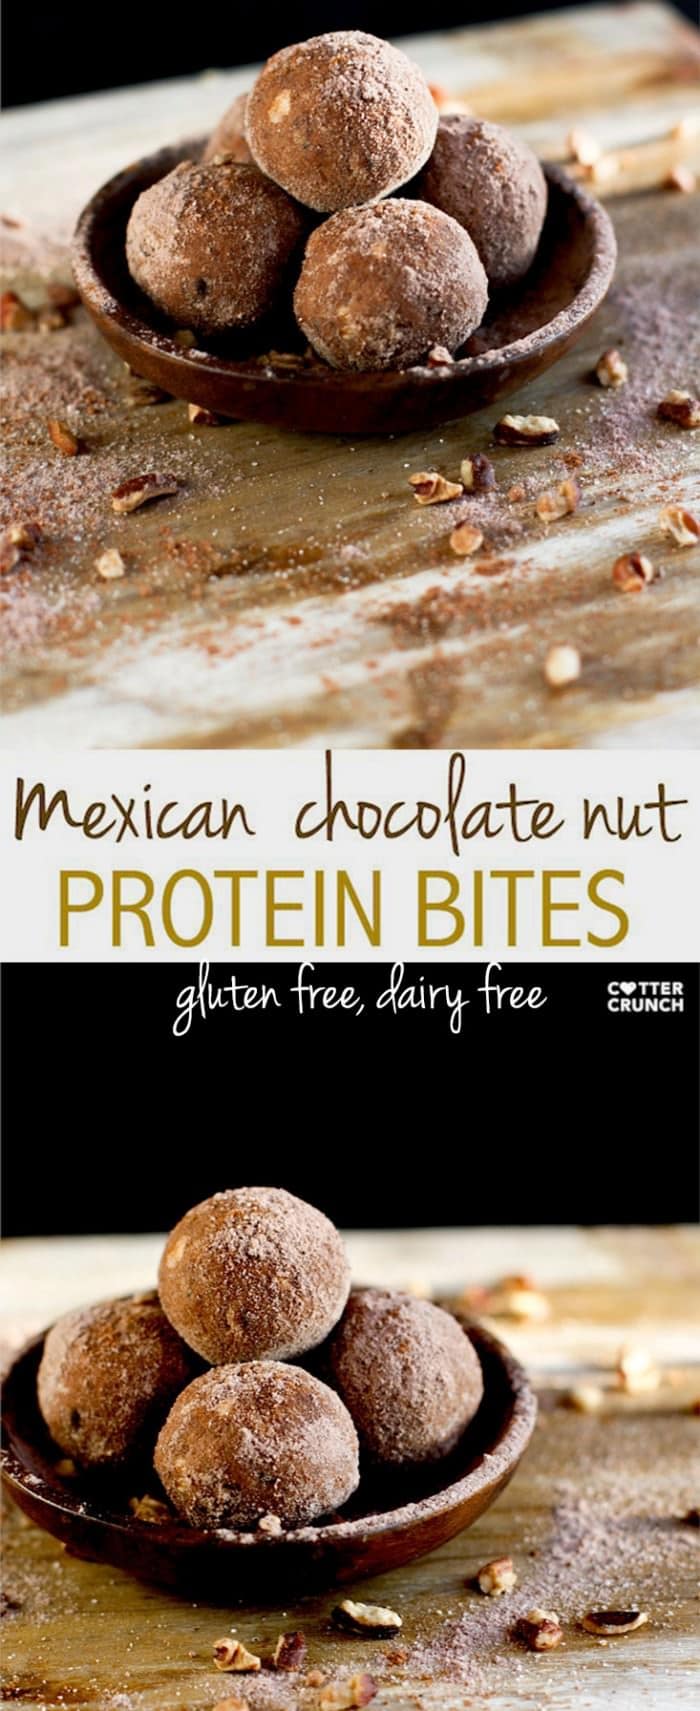 mexican chocolate walnut protein bites. gluten free and grain free! No bake and great for snacking!! Low carb, gluten free, dairy free, and delish!